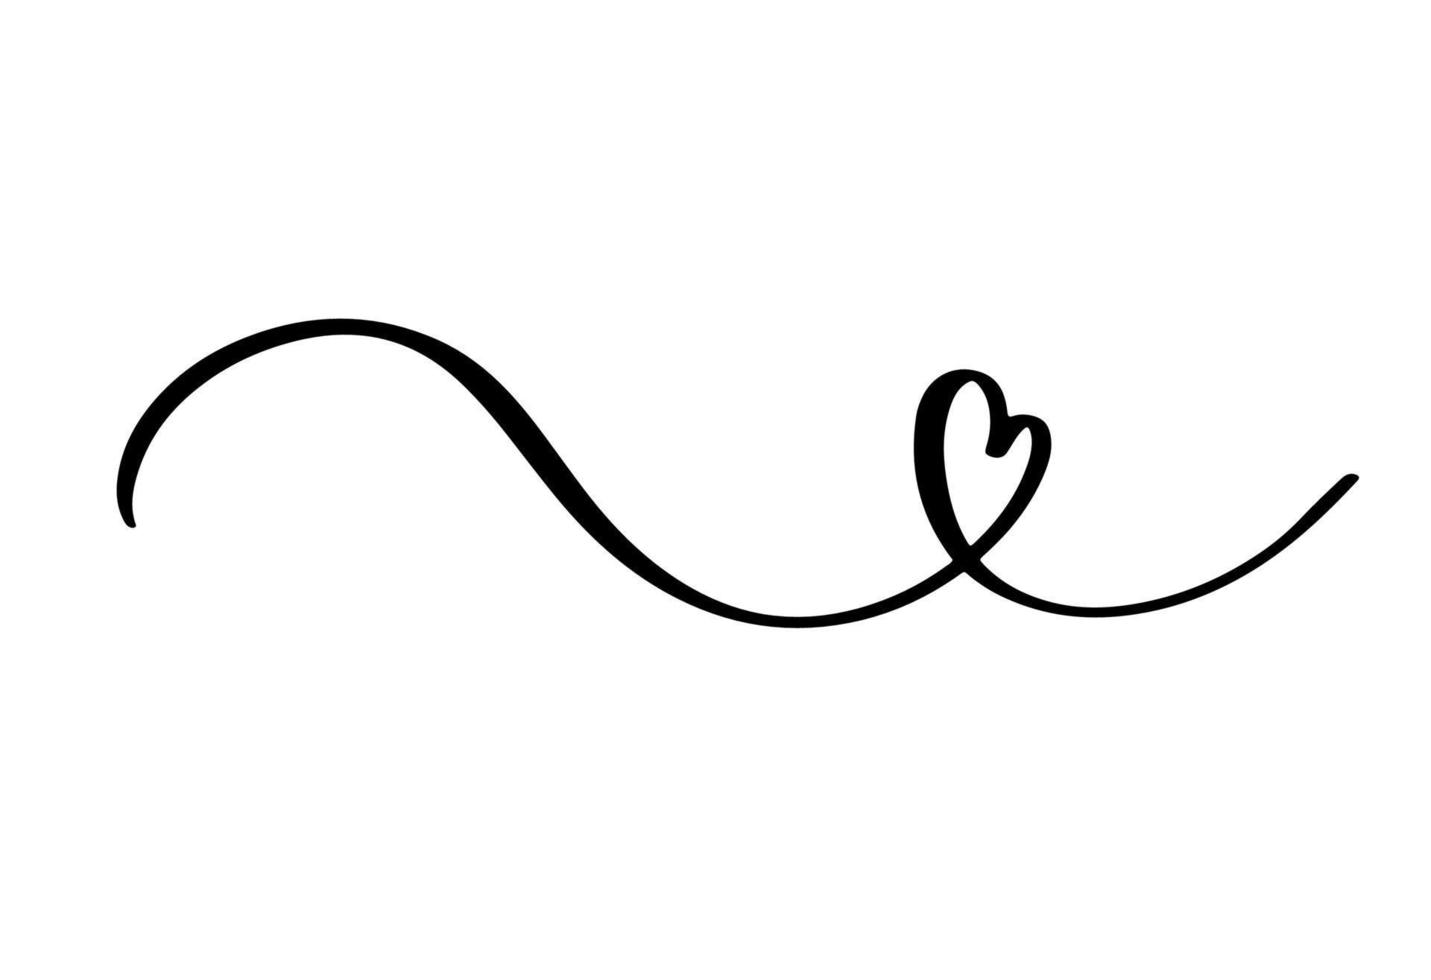 Squiggle and swirl line with a heart. Hand drawn calligraphic swirl. vector